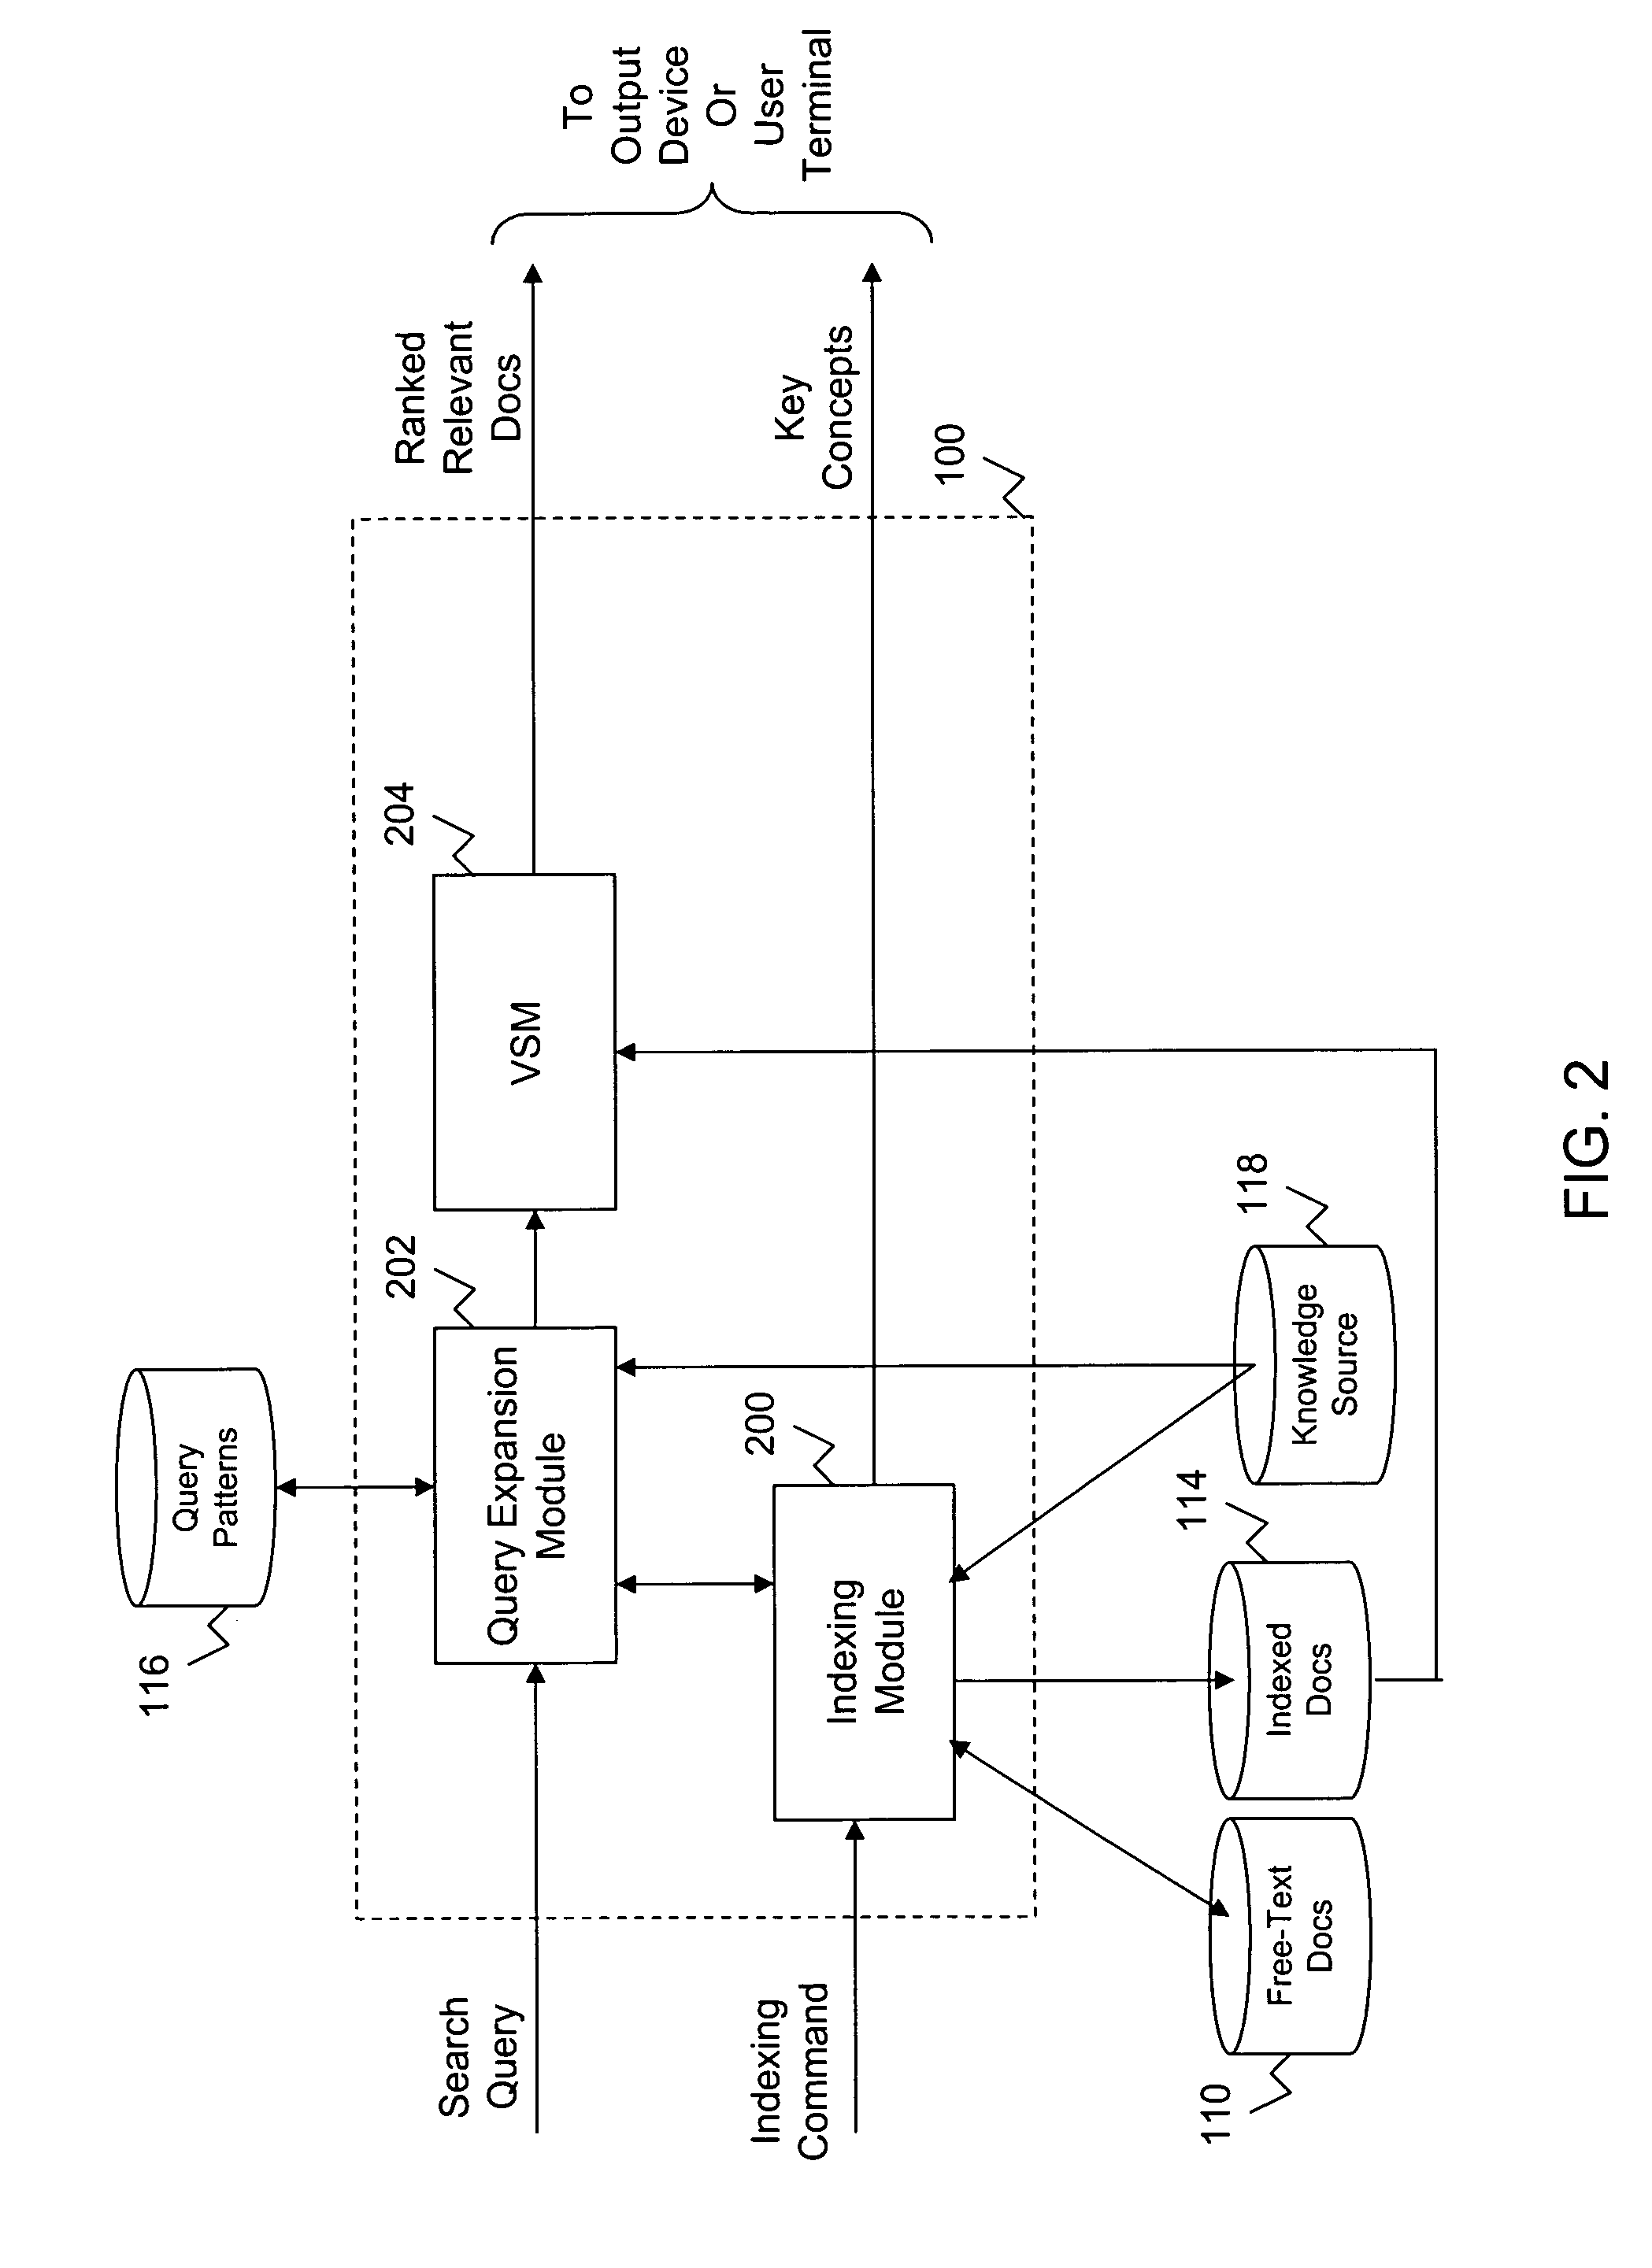 System and method for retrieving scenario-specific documents